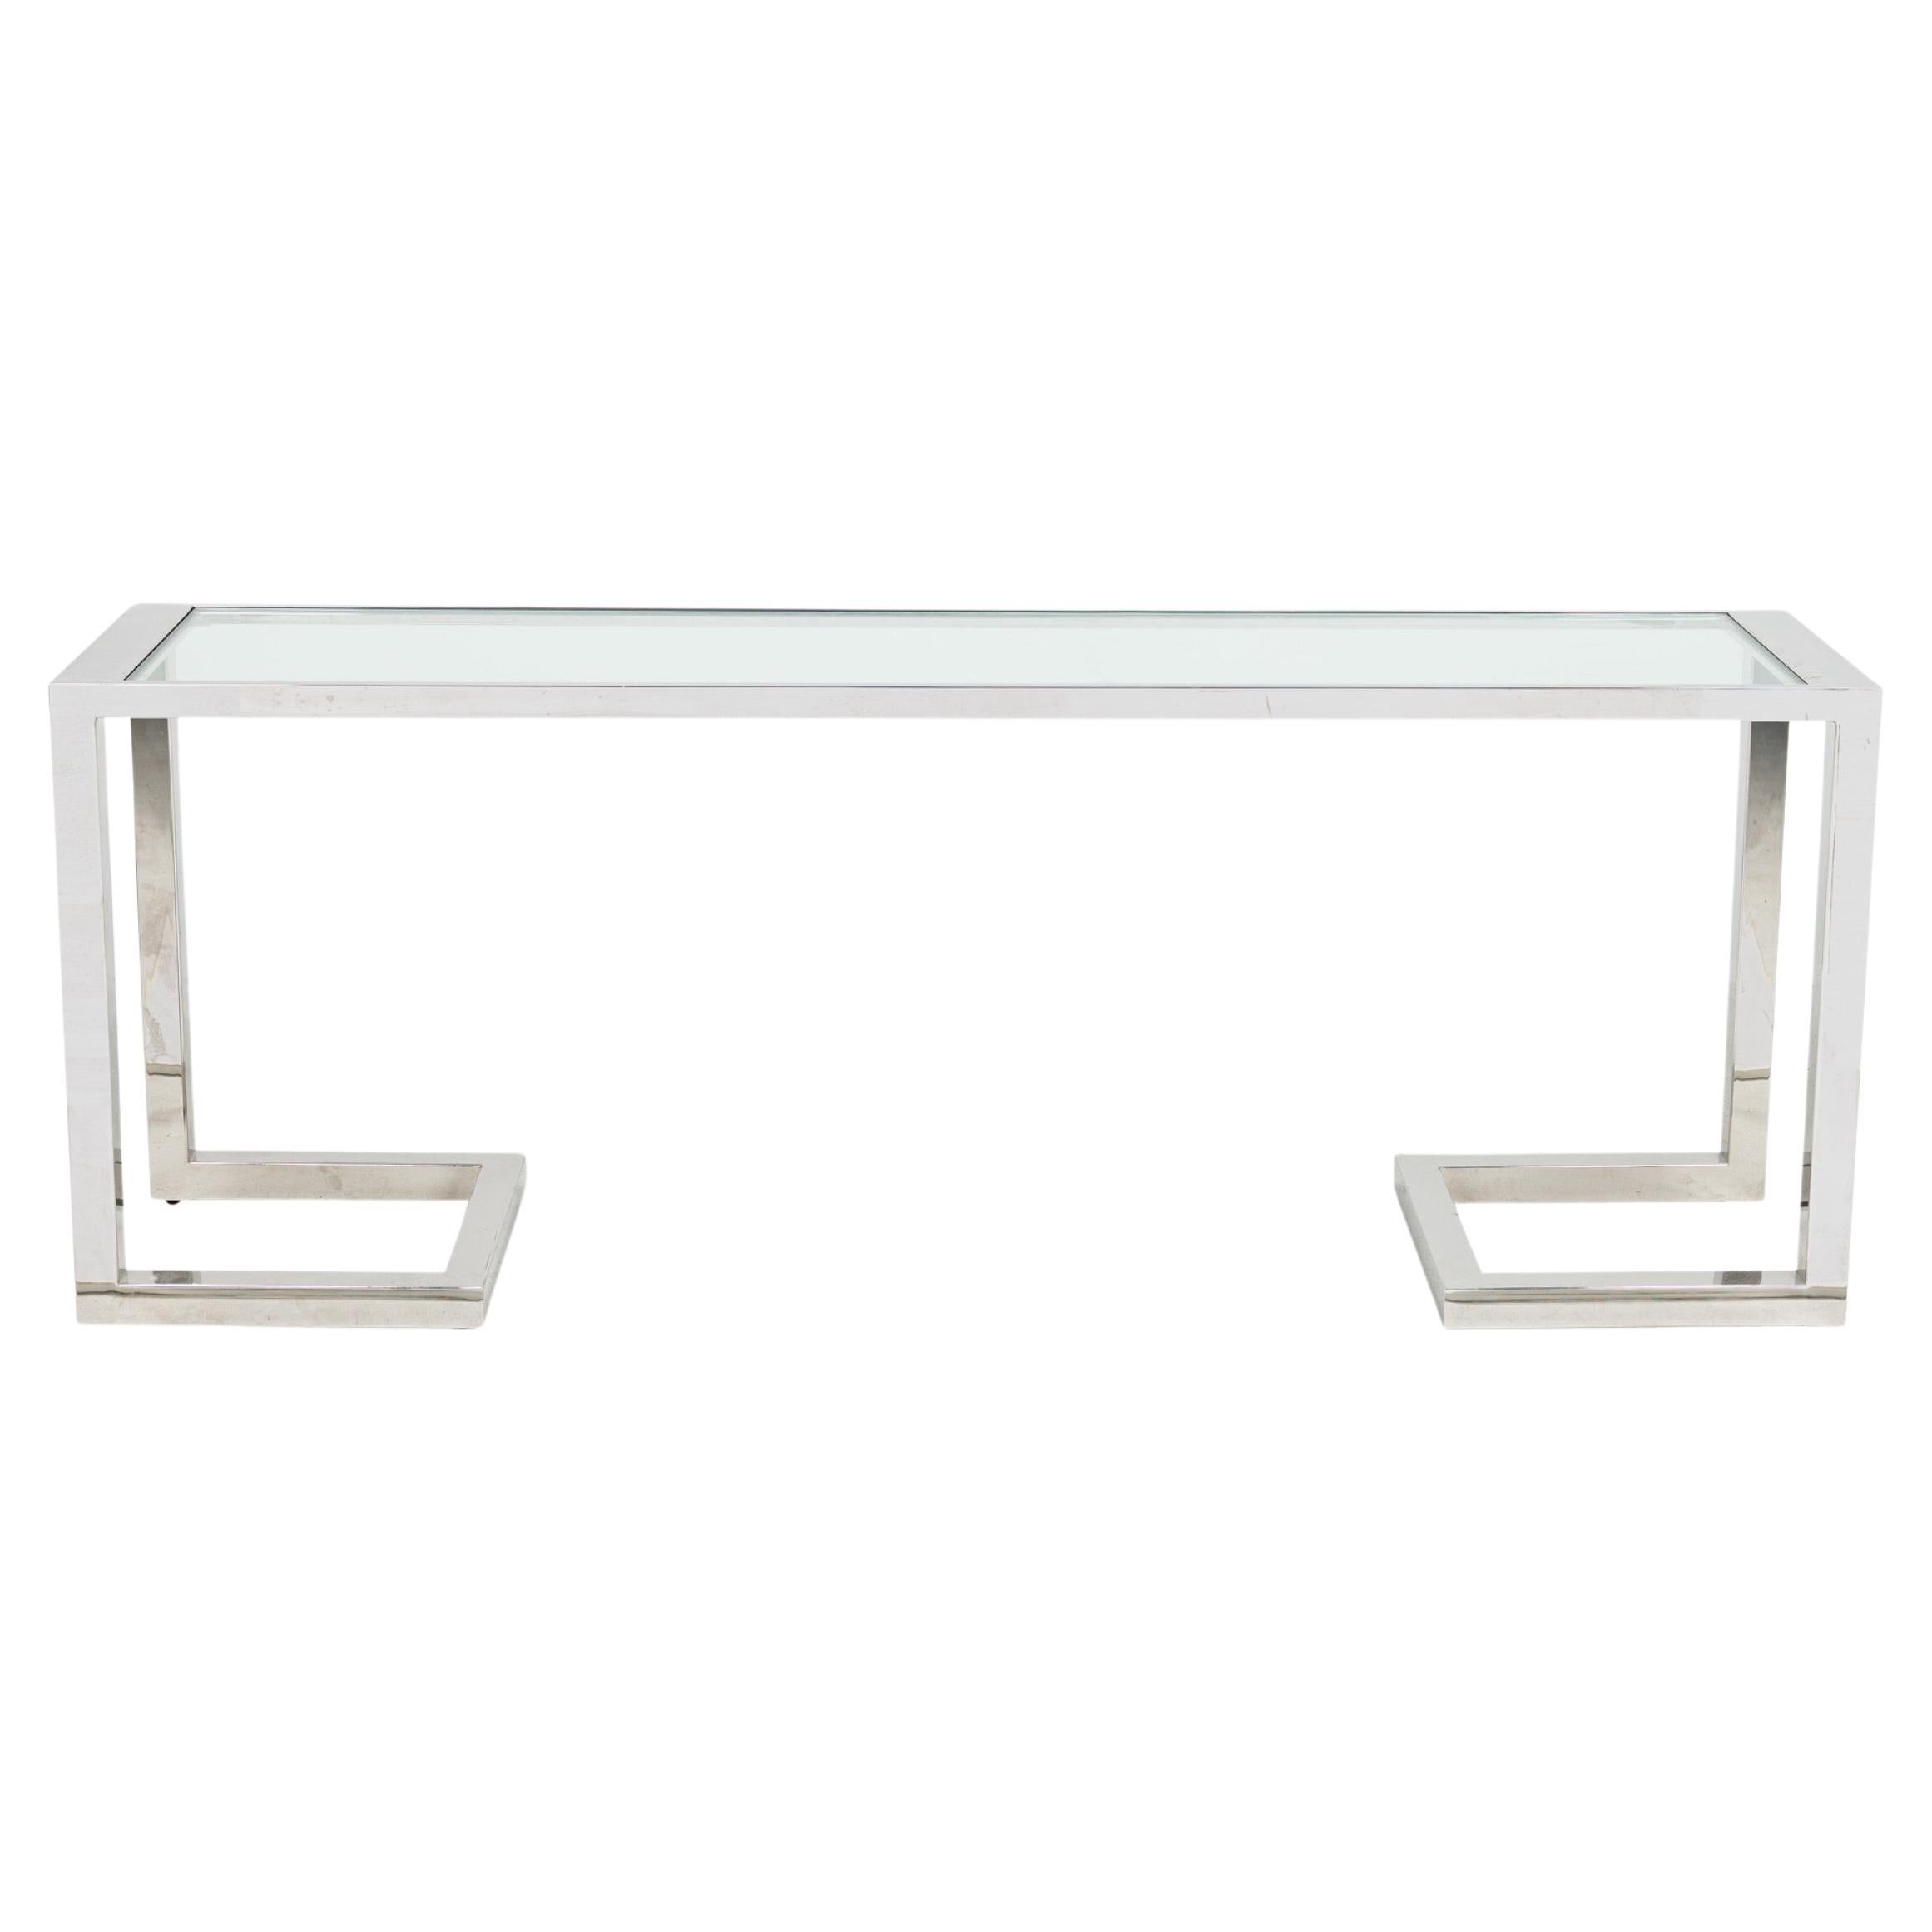 Milo Baughman American Modern Polished Chrome and Glass Bracket Console Table For Sale